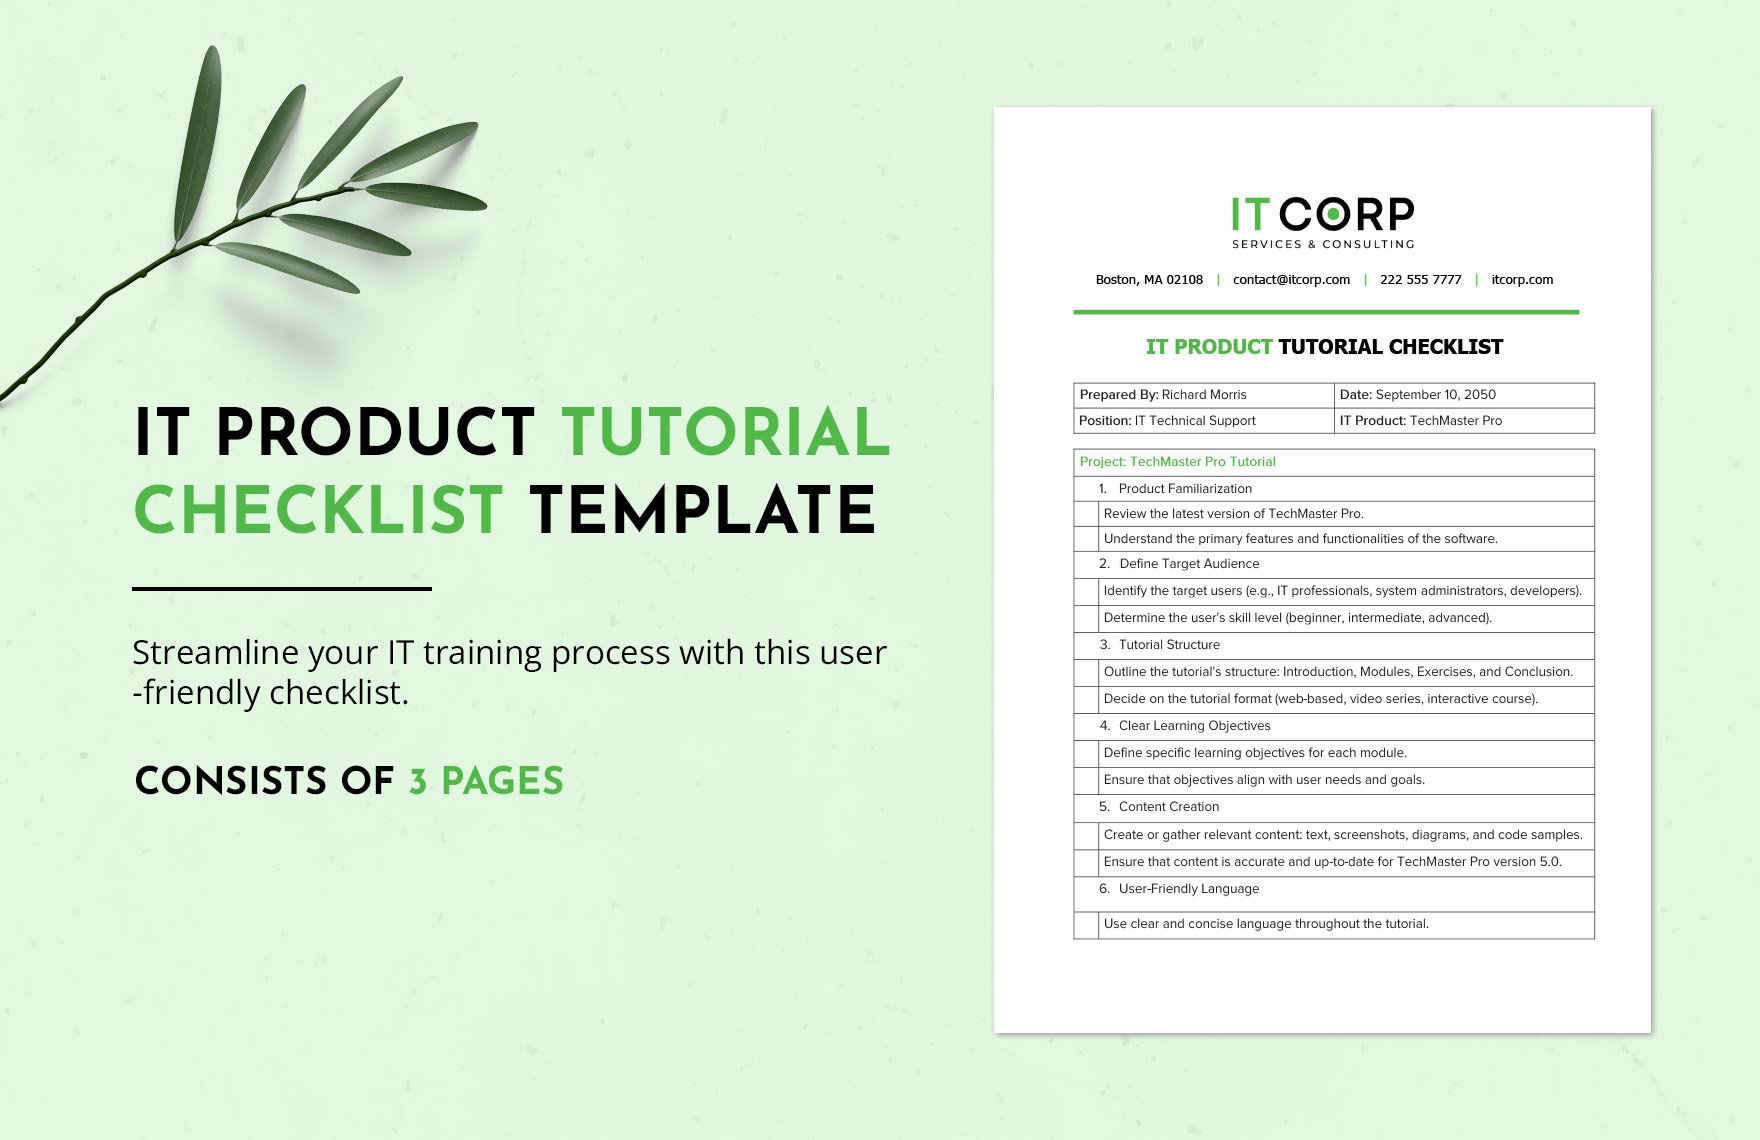 IT Product Tutorial Checklist Template